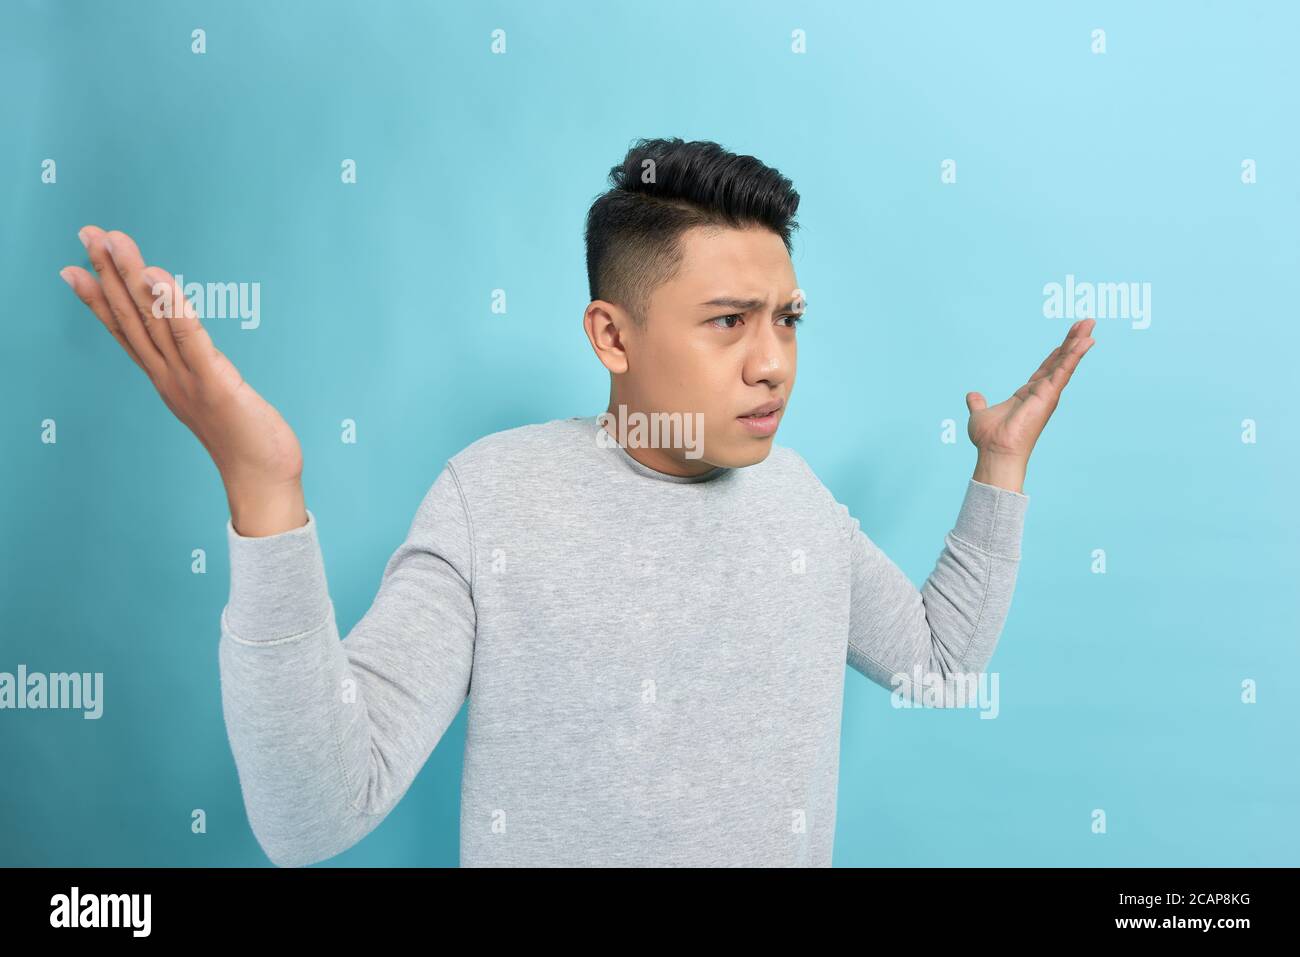 Side view of a angry man shouting and gesturing with hands isolated over blue background Stock Photo